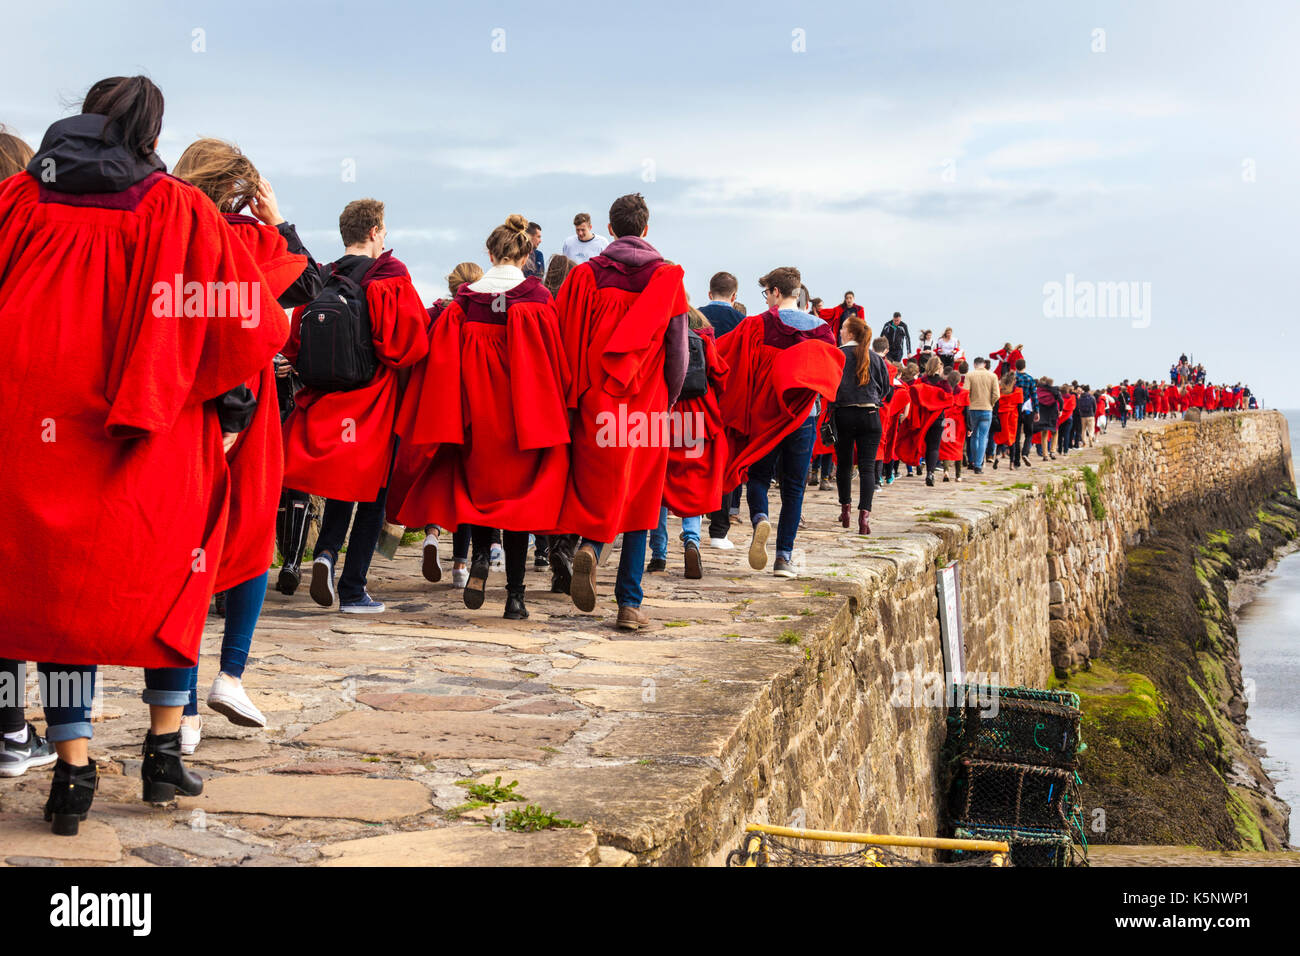 Freshers' Week at St Andrews University, Fife, UK. Students in their red gowns brave the weather to take their traditional Sunday morning walk along the pier. Stock Photo